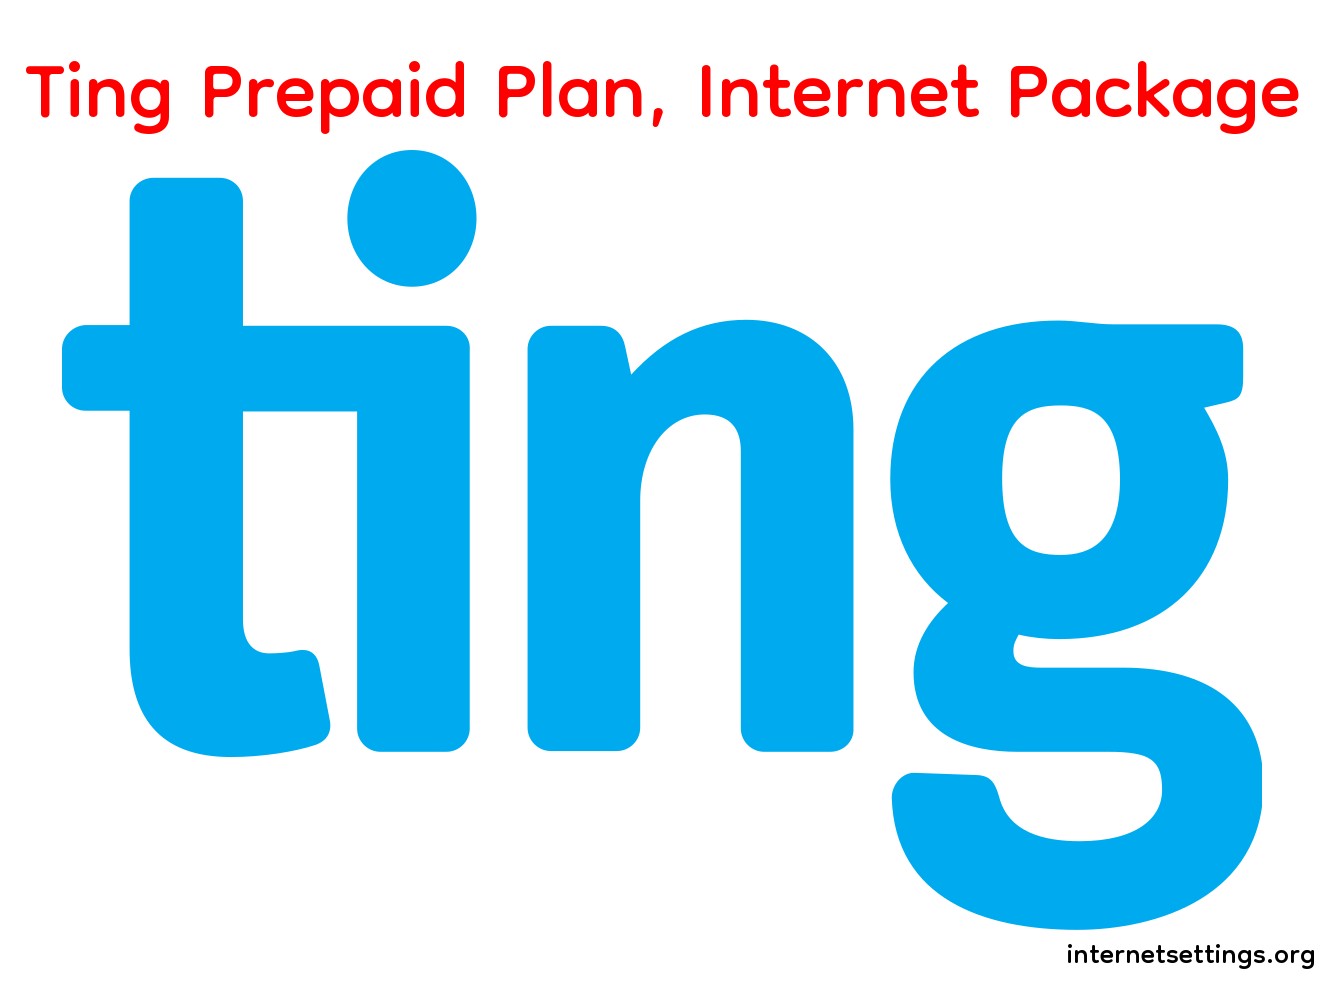 Ting Prepaid Plan Internet Package and Unlimited Data